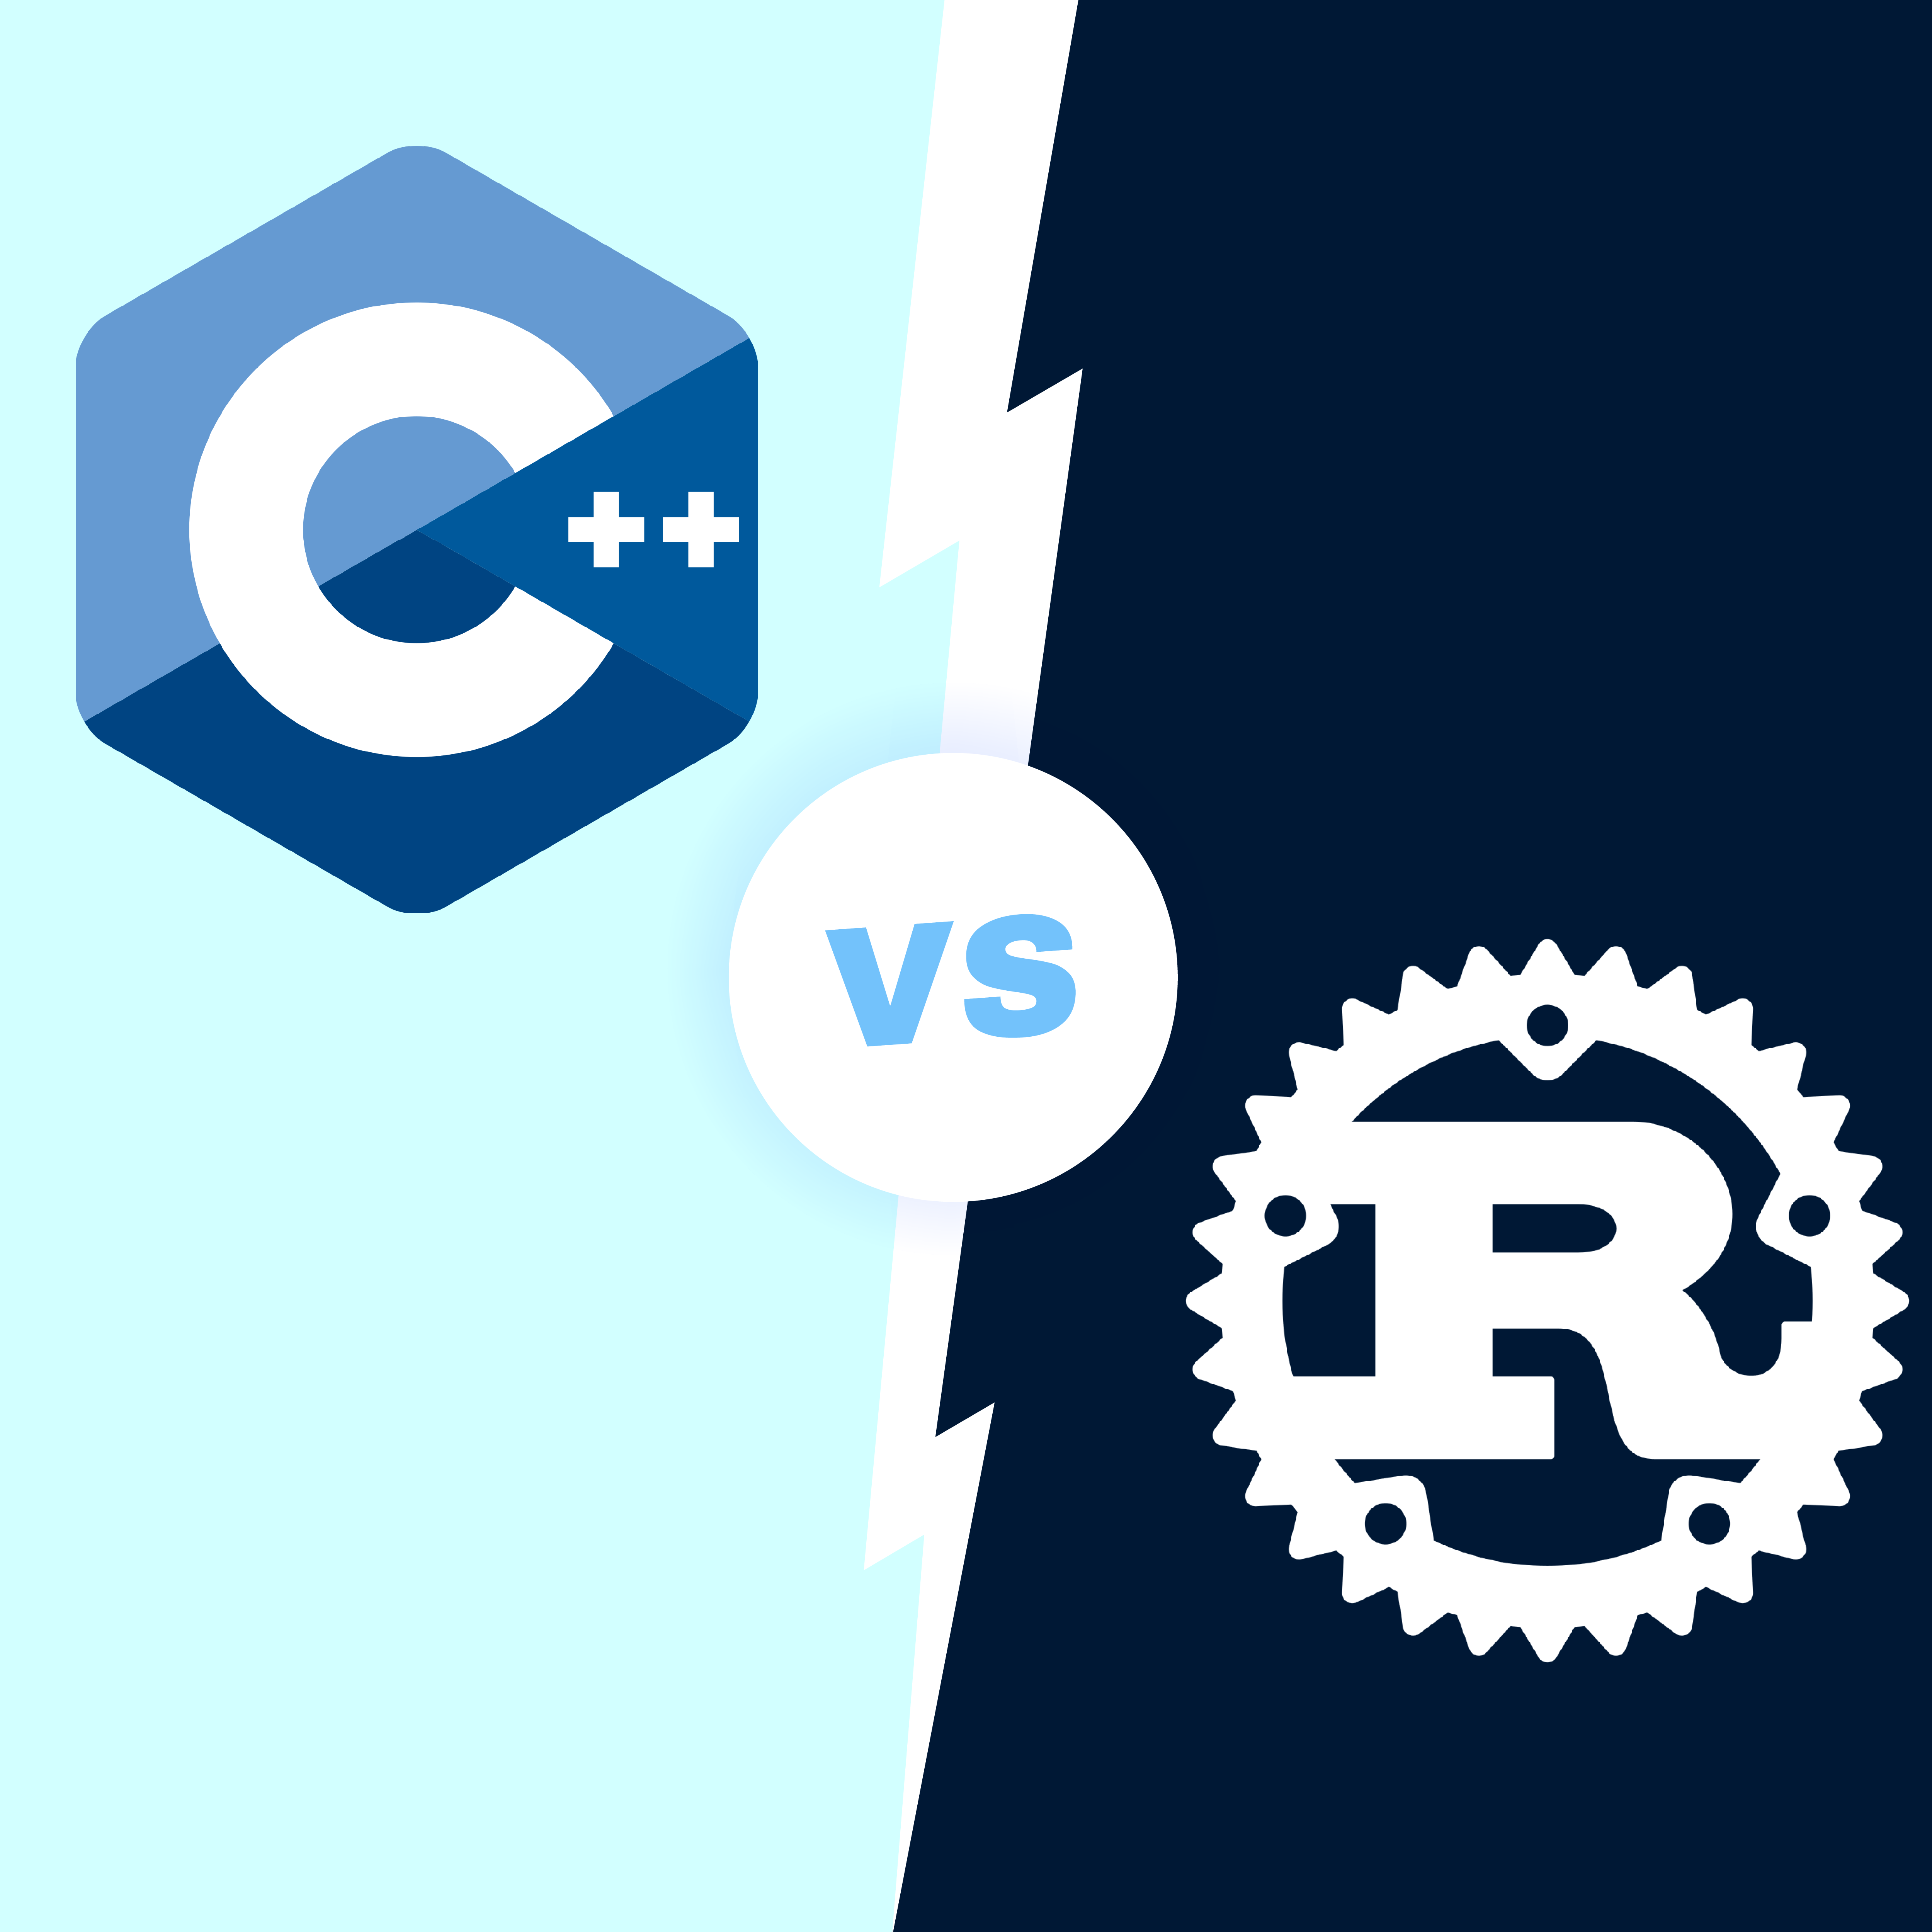 Rust Vs. C++: an Utmost Comparison of Performance, Speed and Safety